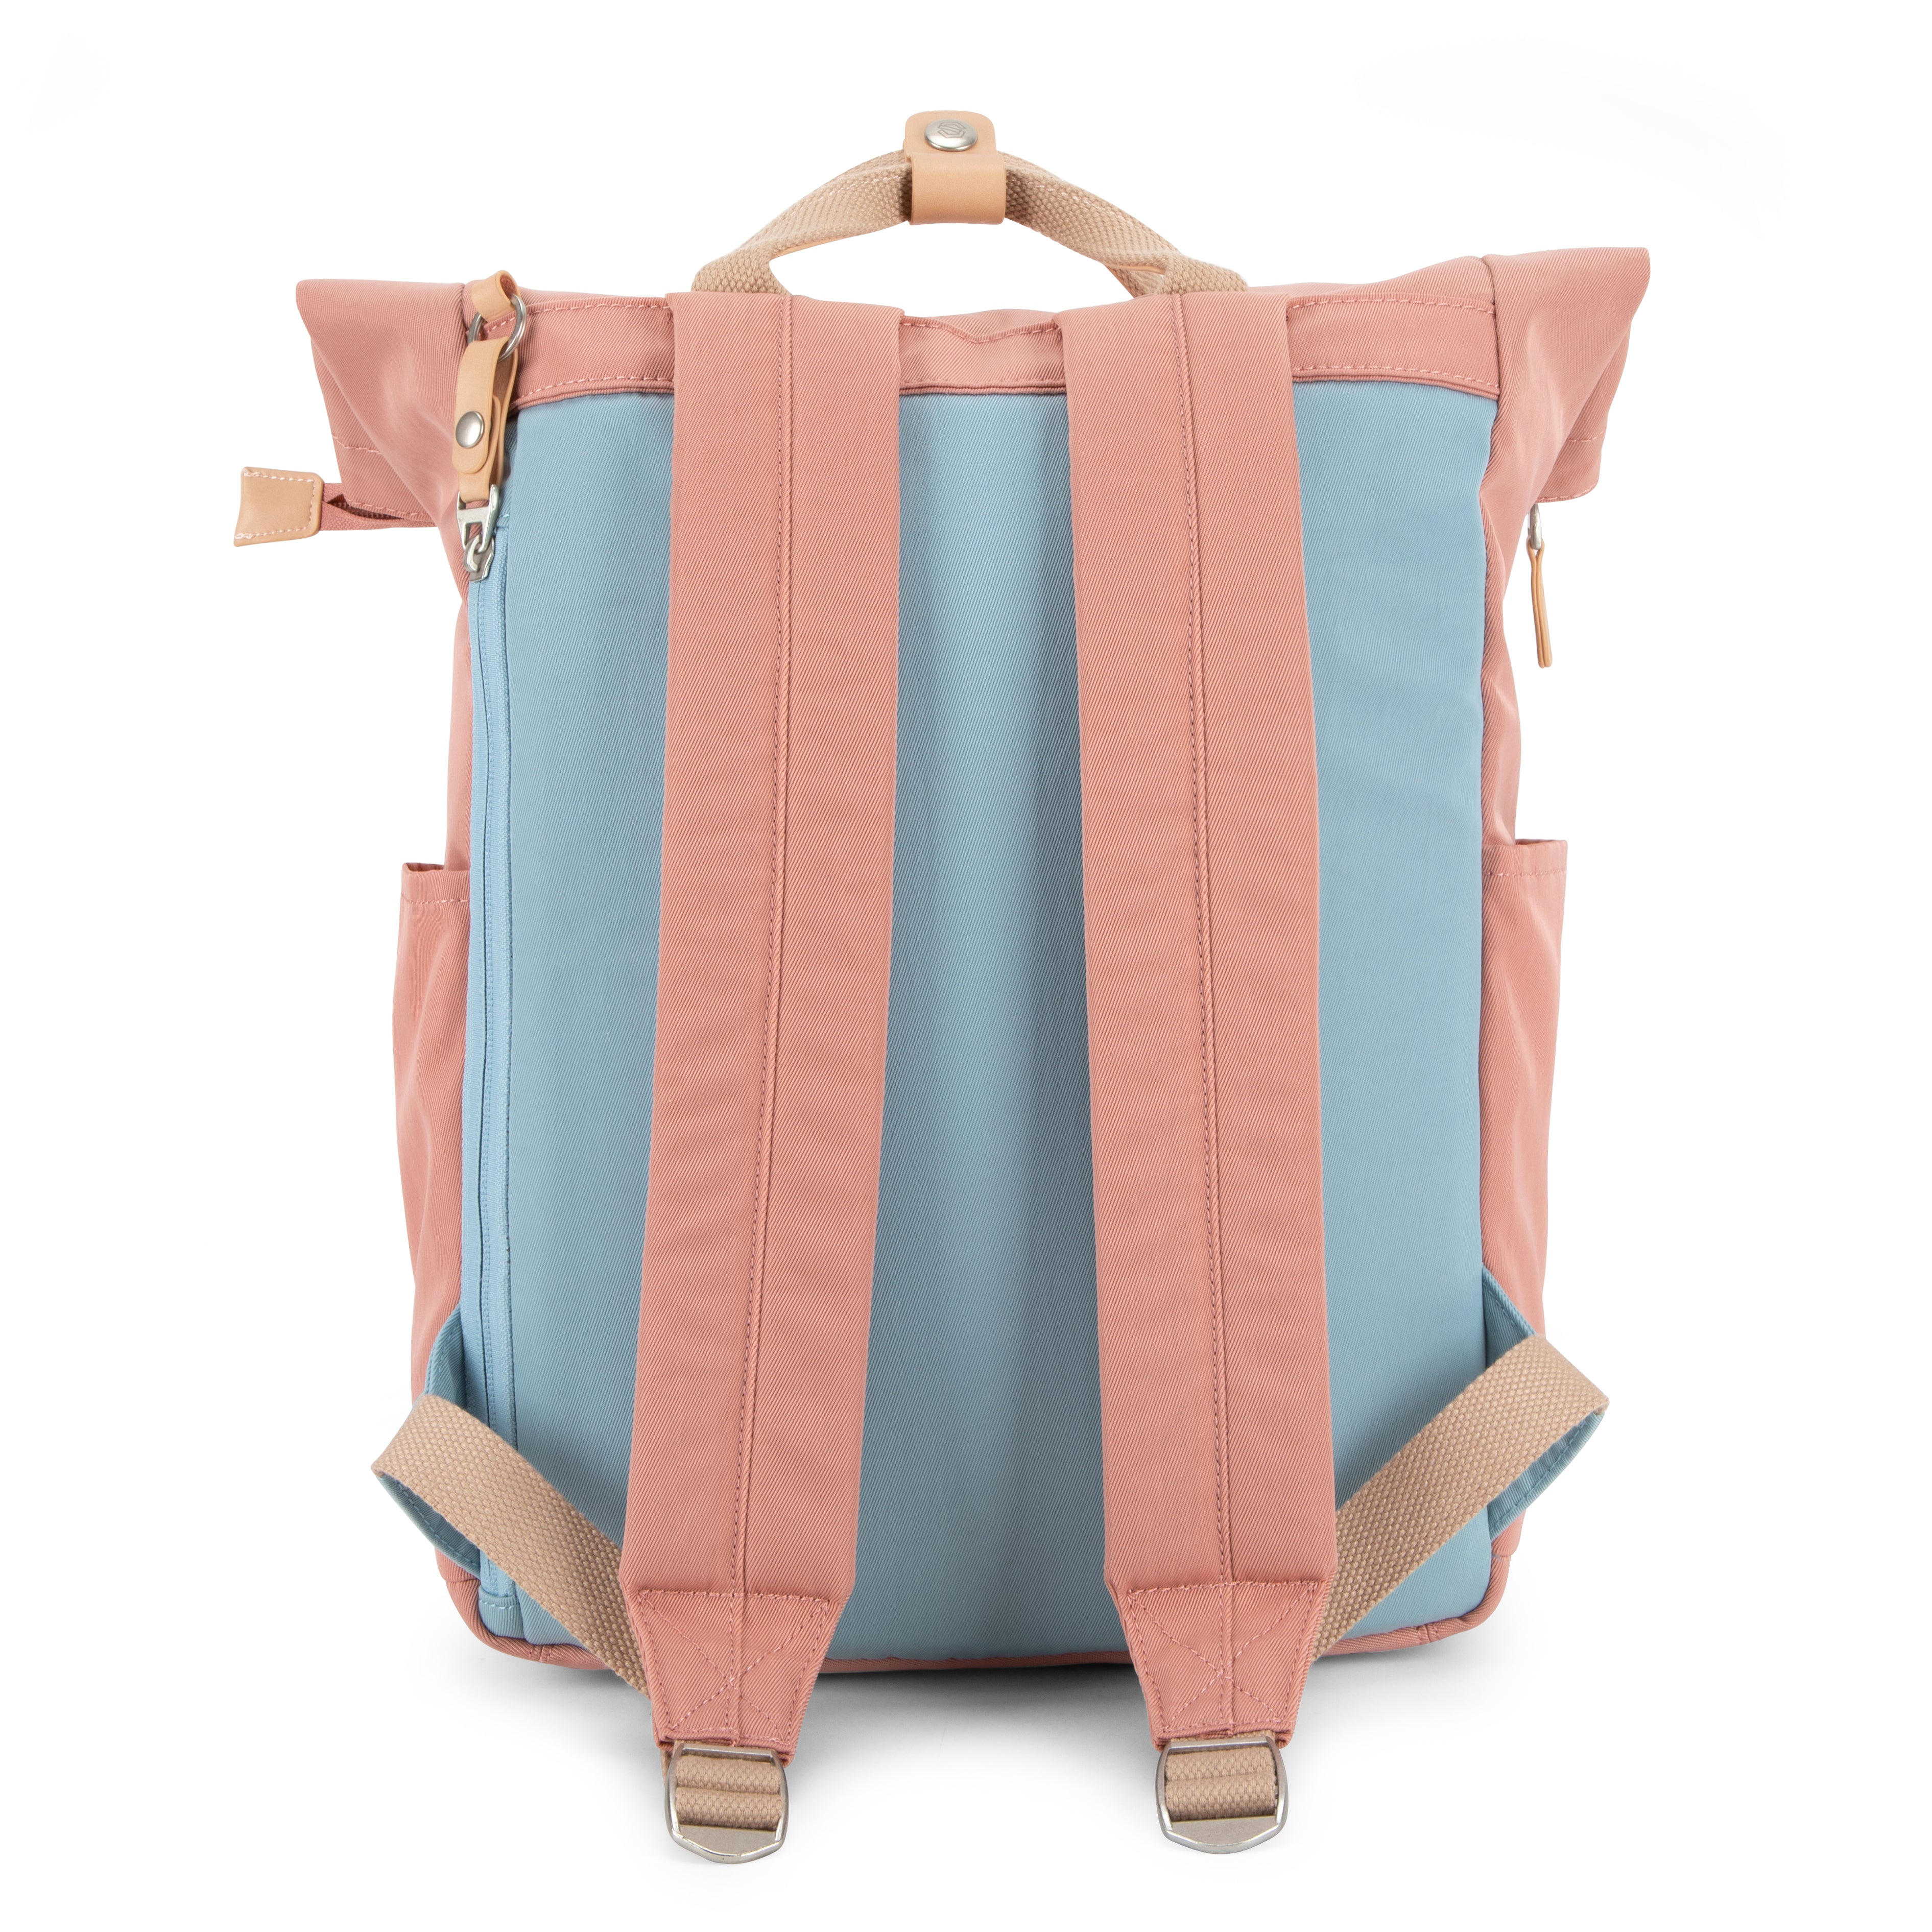 Canary Wharf Backpack - Pink with Light Blue - Seventeen London